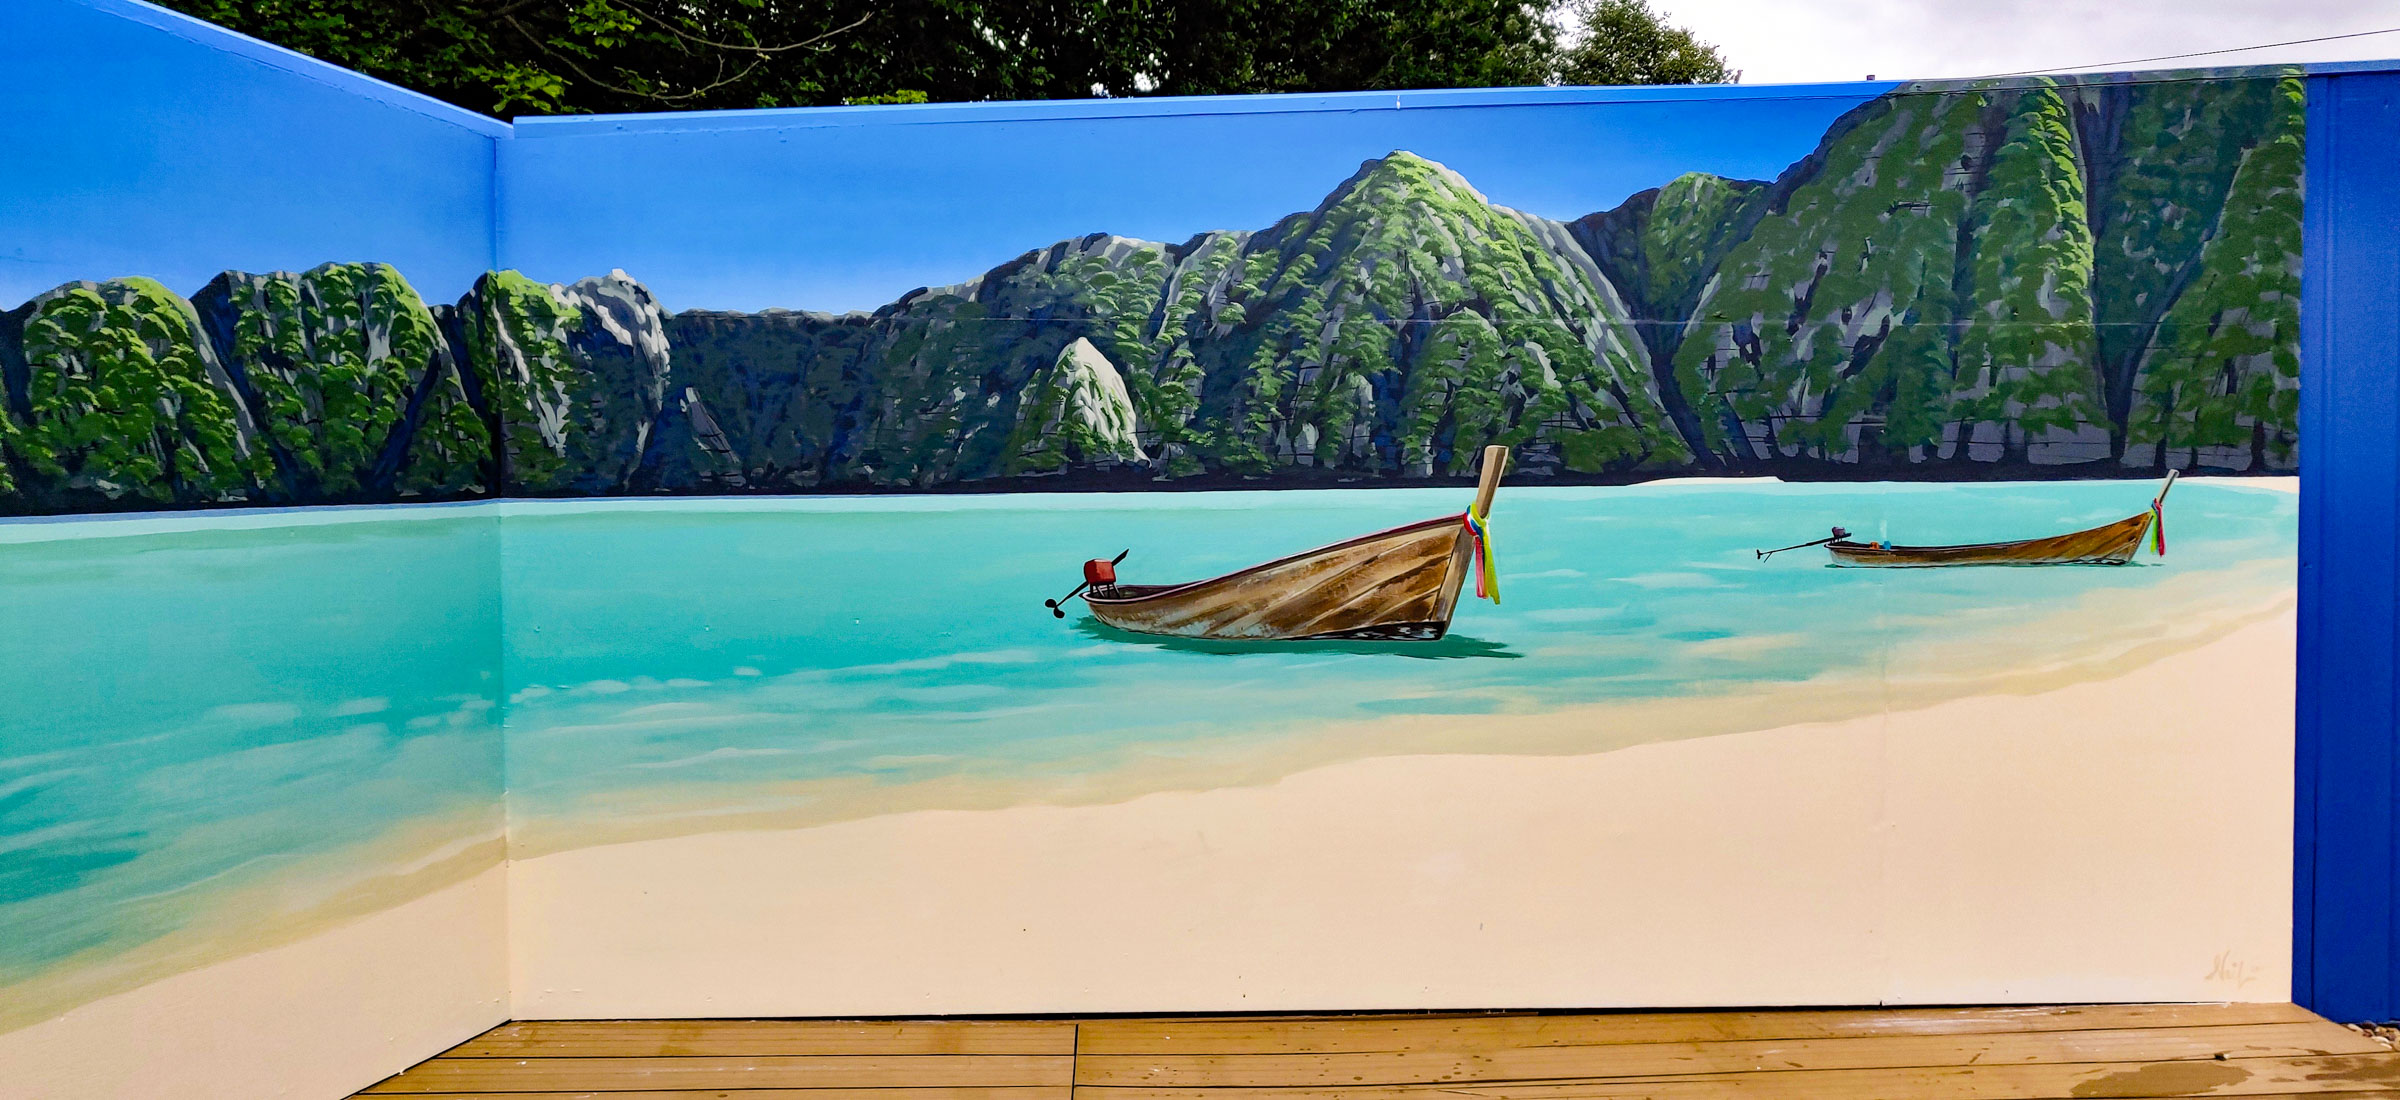 Thailand Holiday Memories Mural - Right side with boats